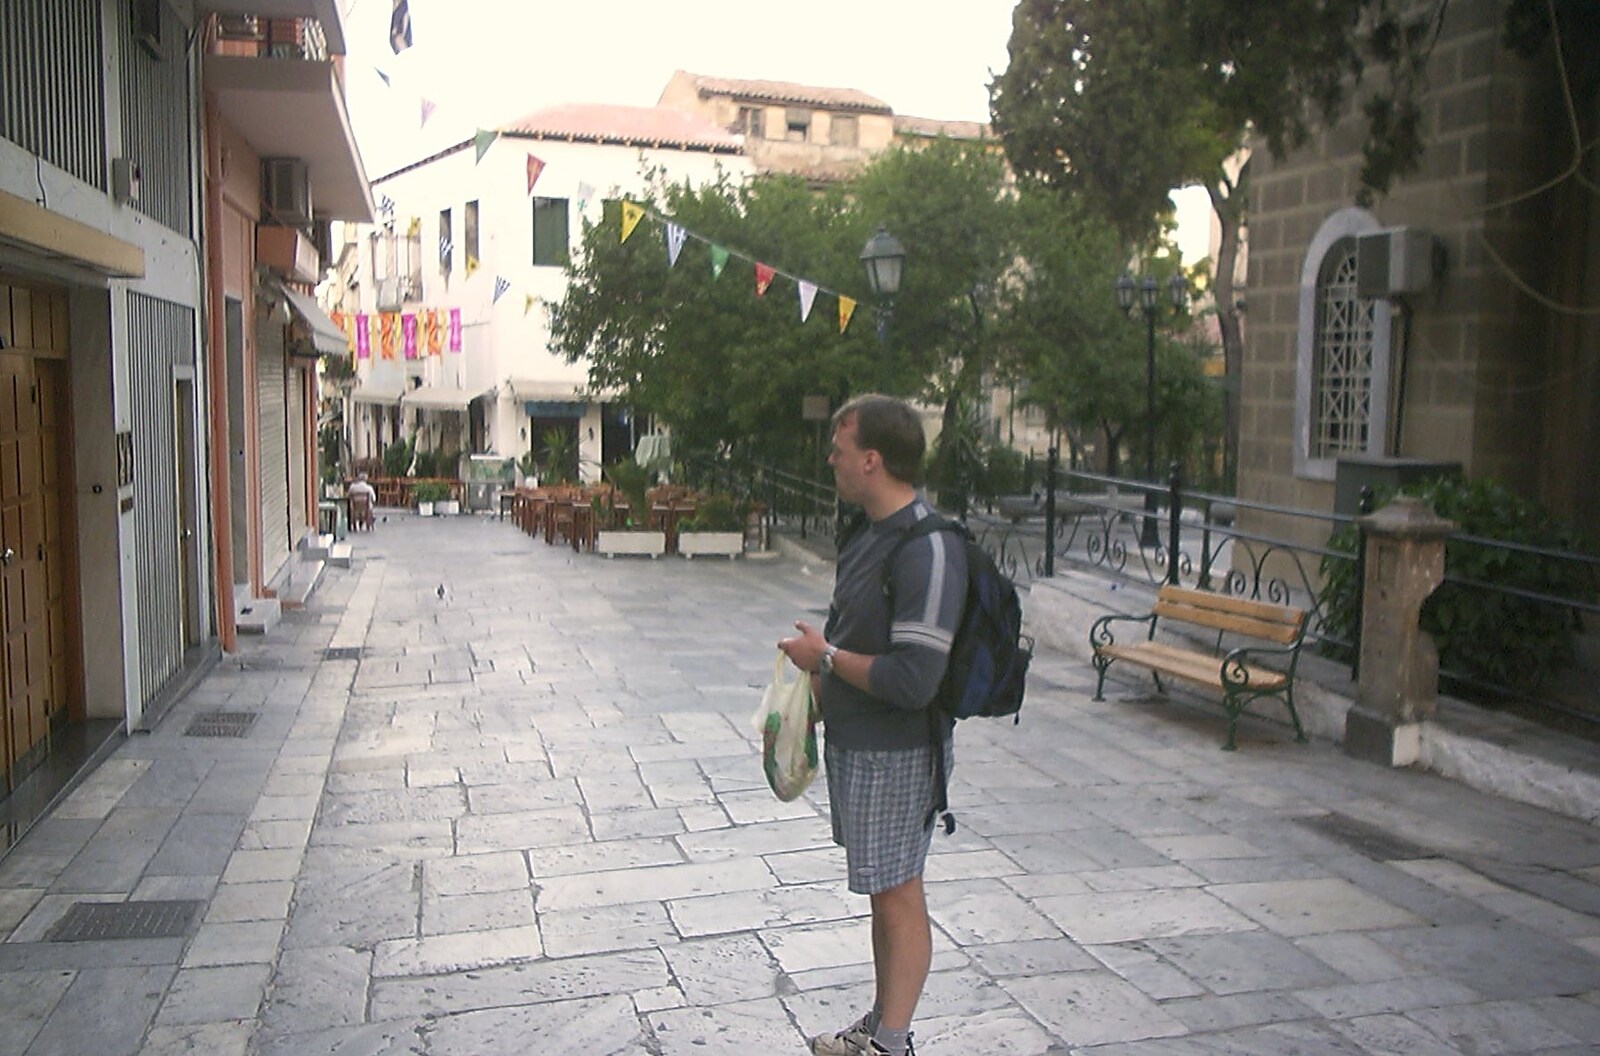 A Postcard From Athens: A Day Trip to the Olympics, Greece - 19th August 2004: Nick looks around